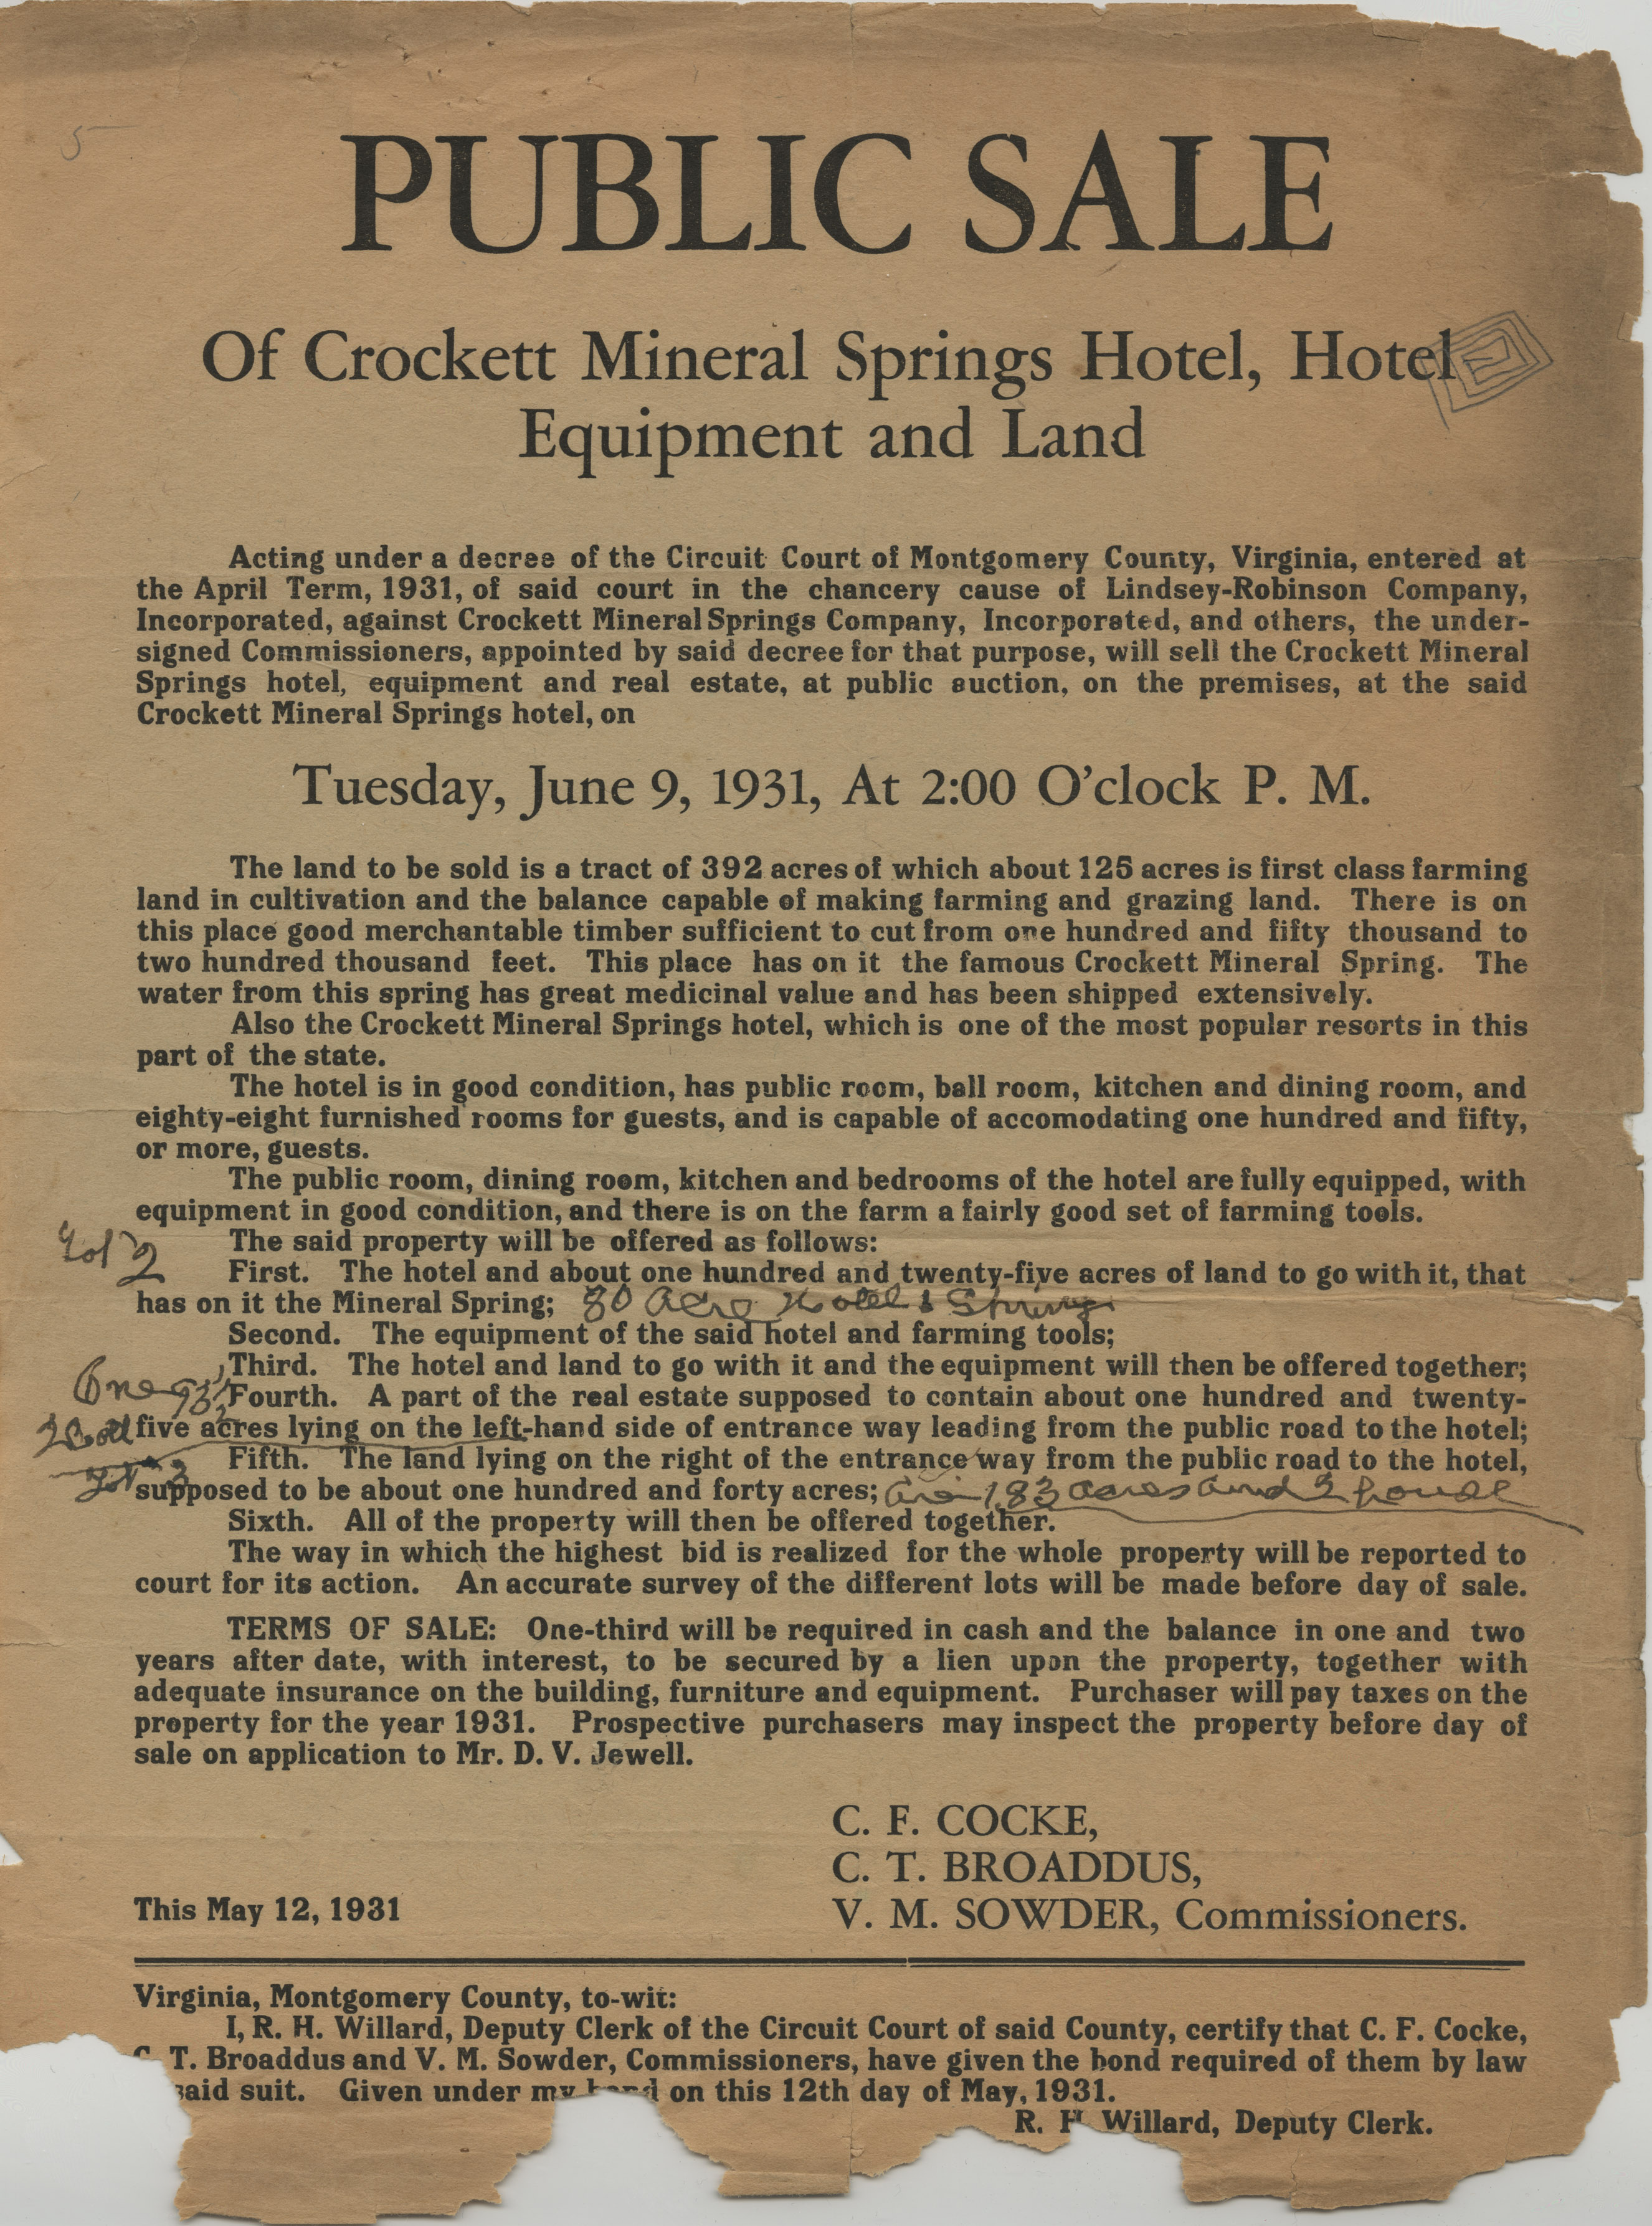 Crockett Mineral Springs Land and Equipment Auction Broadside, 1931.